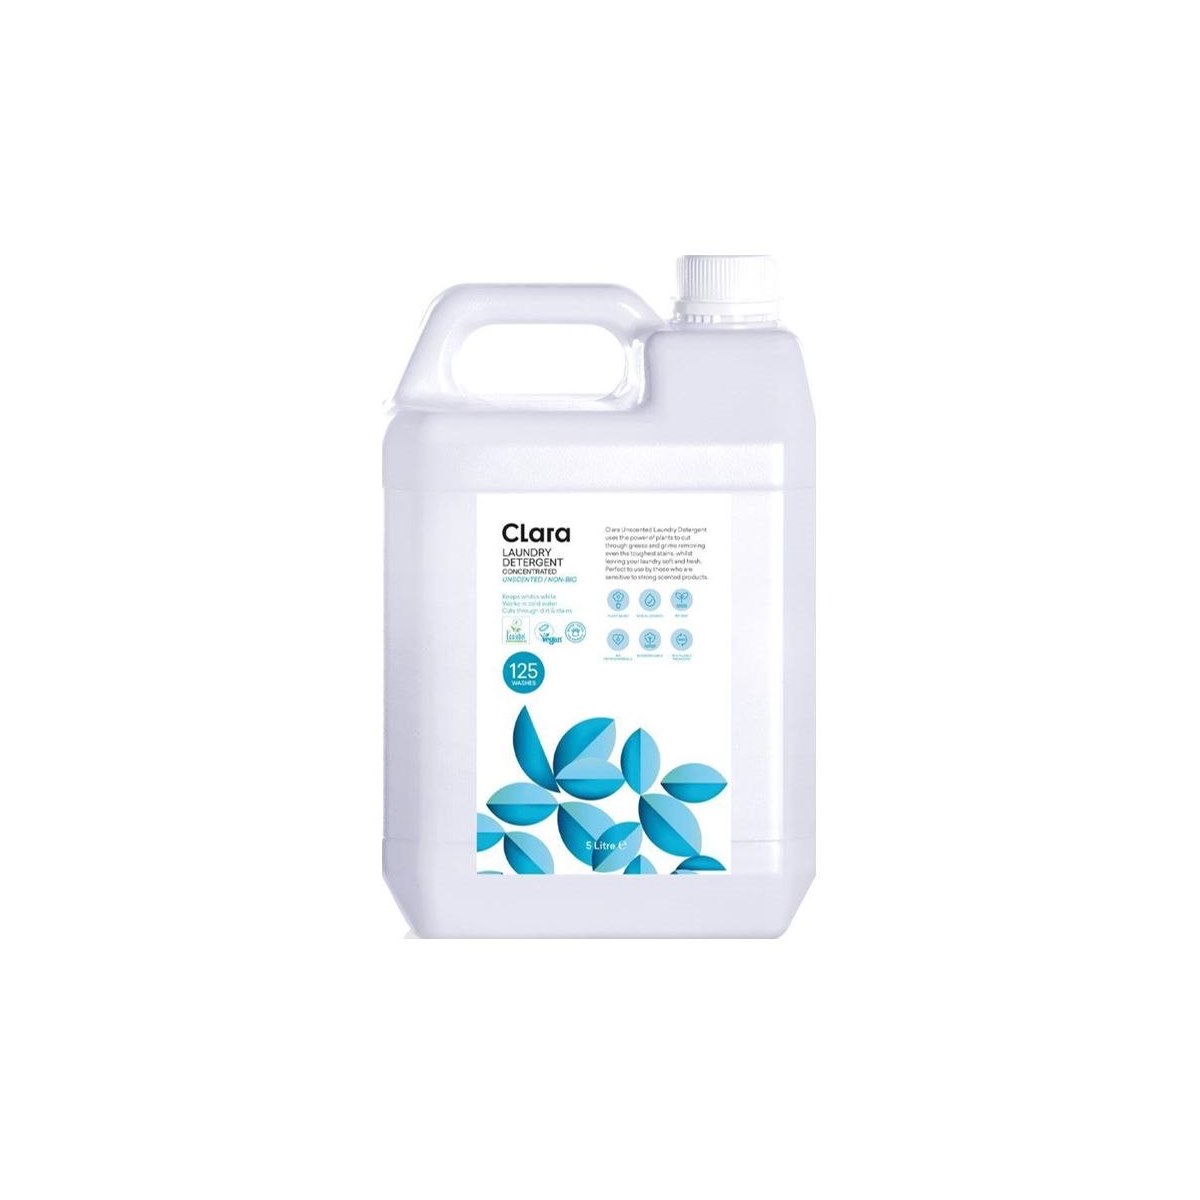 Clara Concentrated Laundry Detergent Unscented Non-Bio 5L